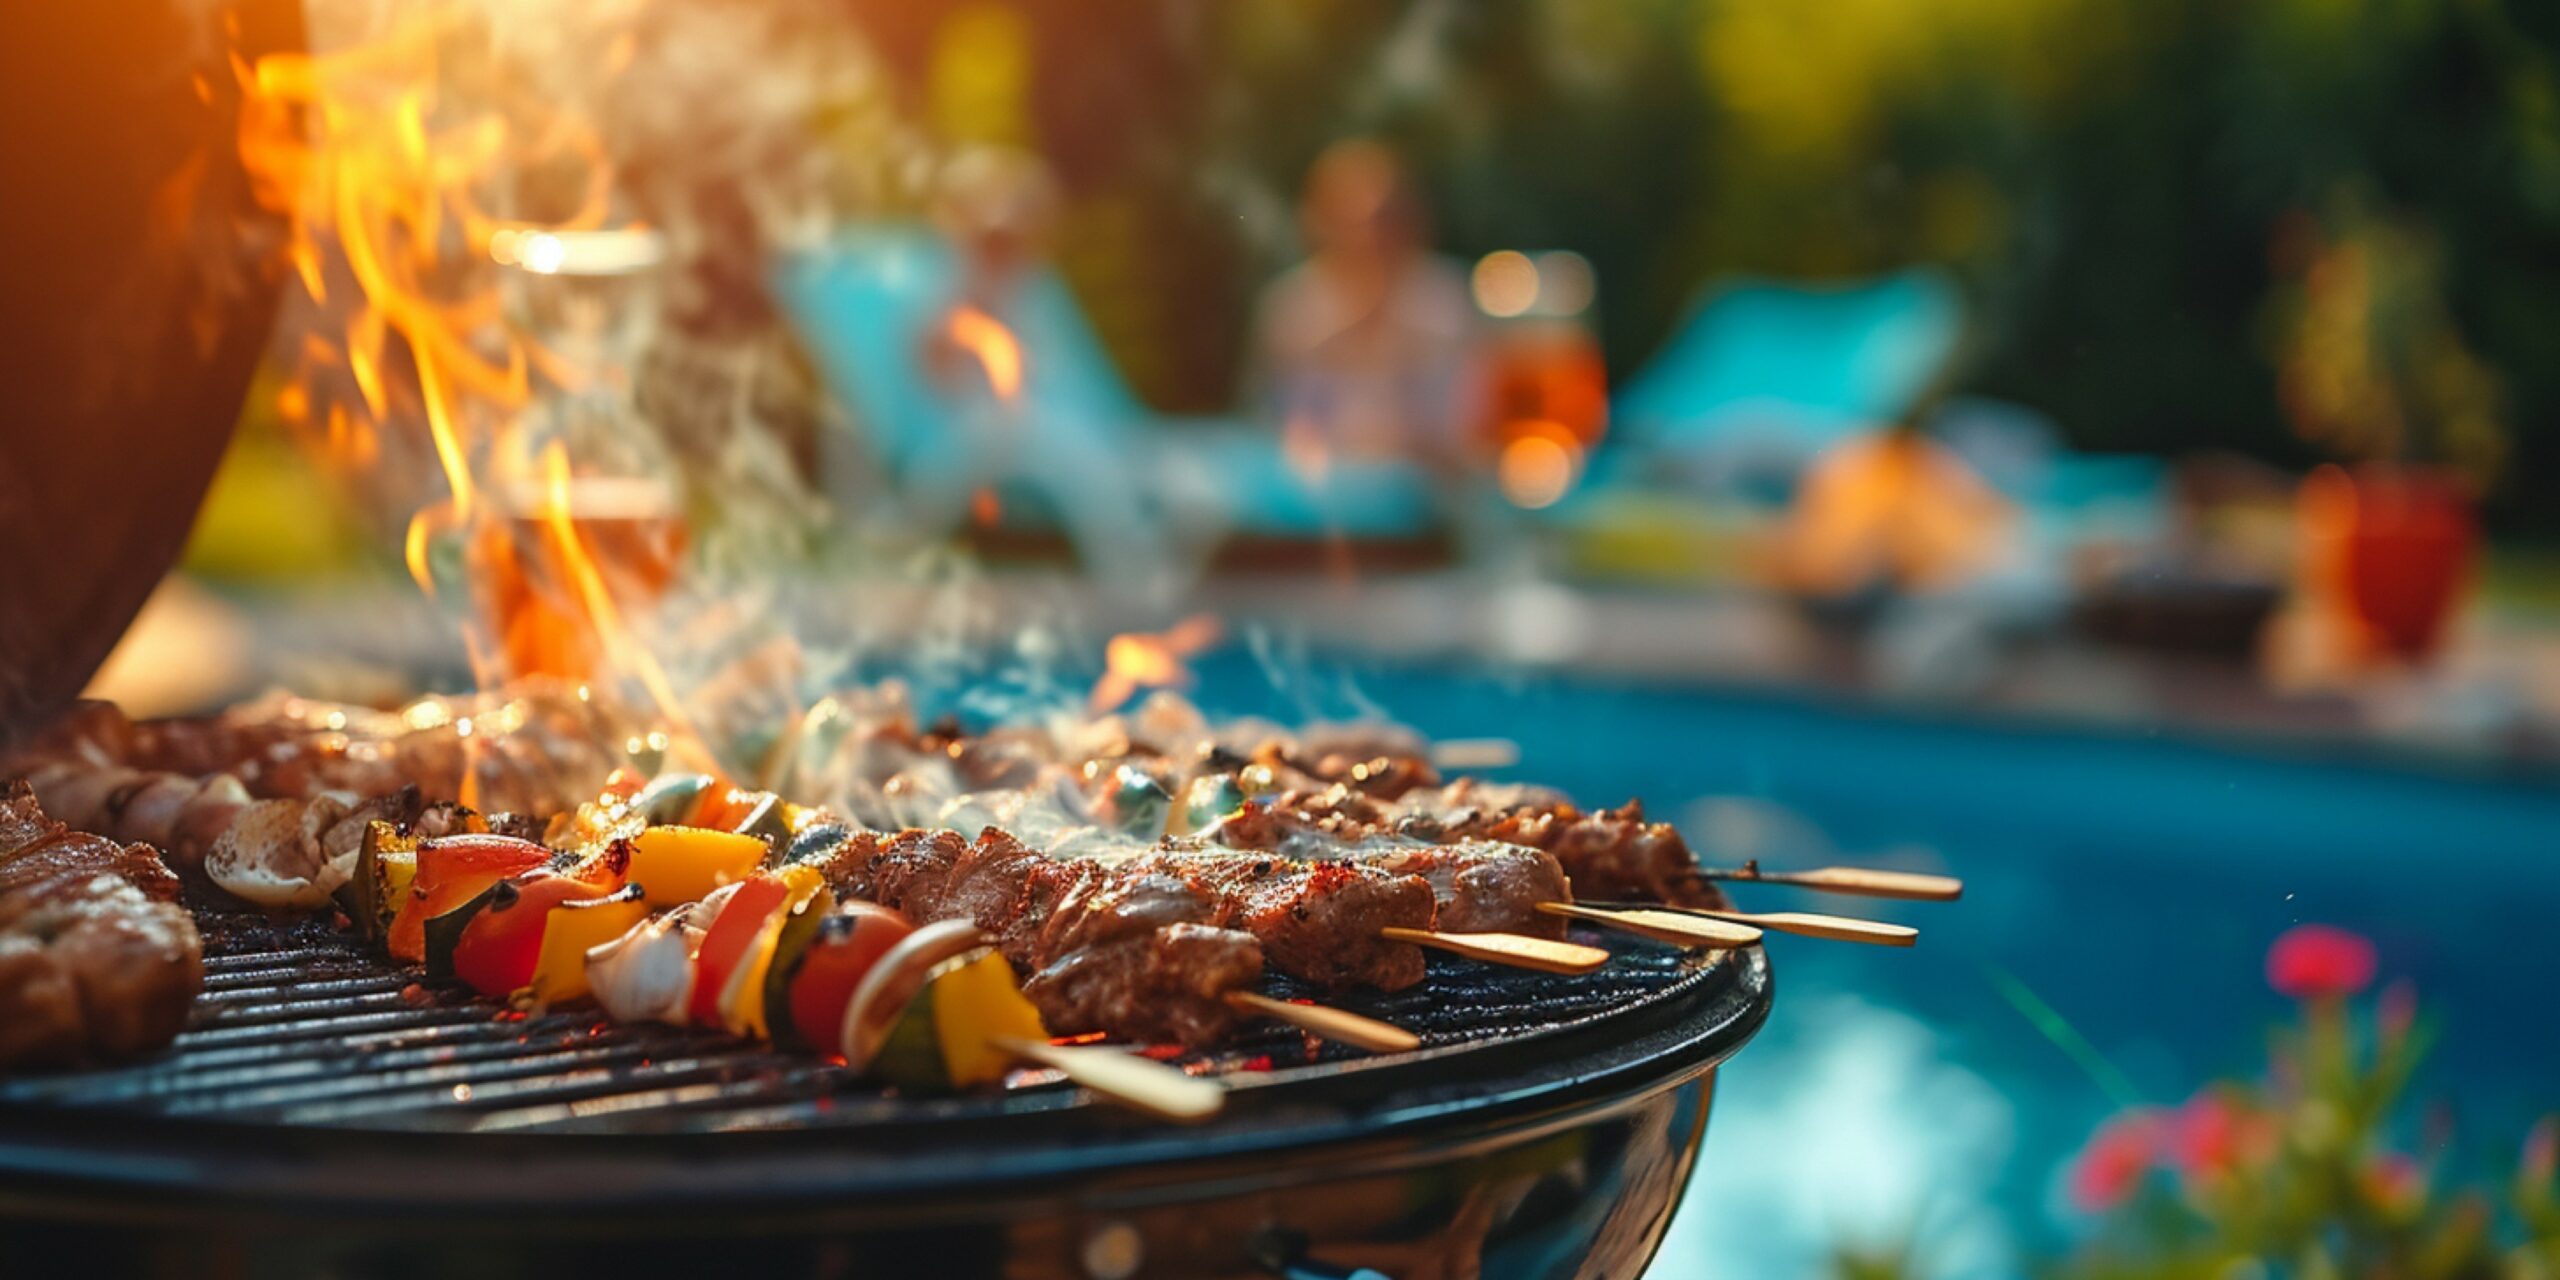 Delicious meat and vegetable skewers cooking on a barbecue in Australia.